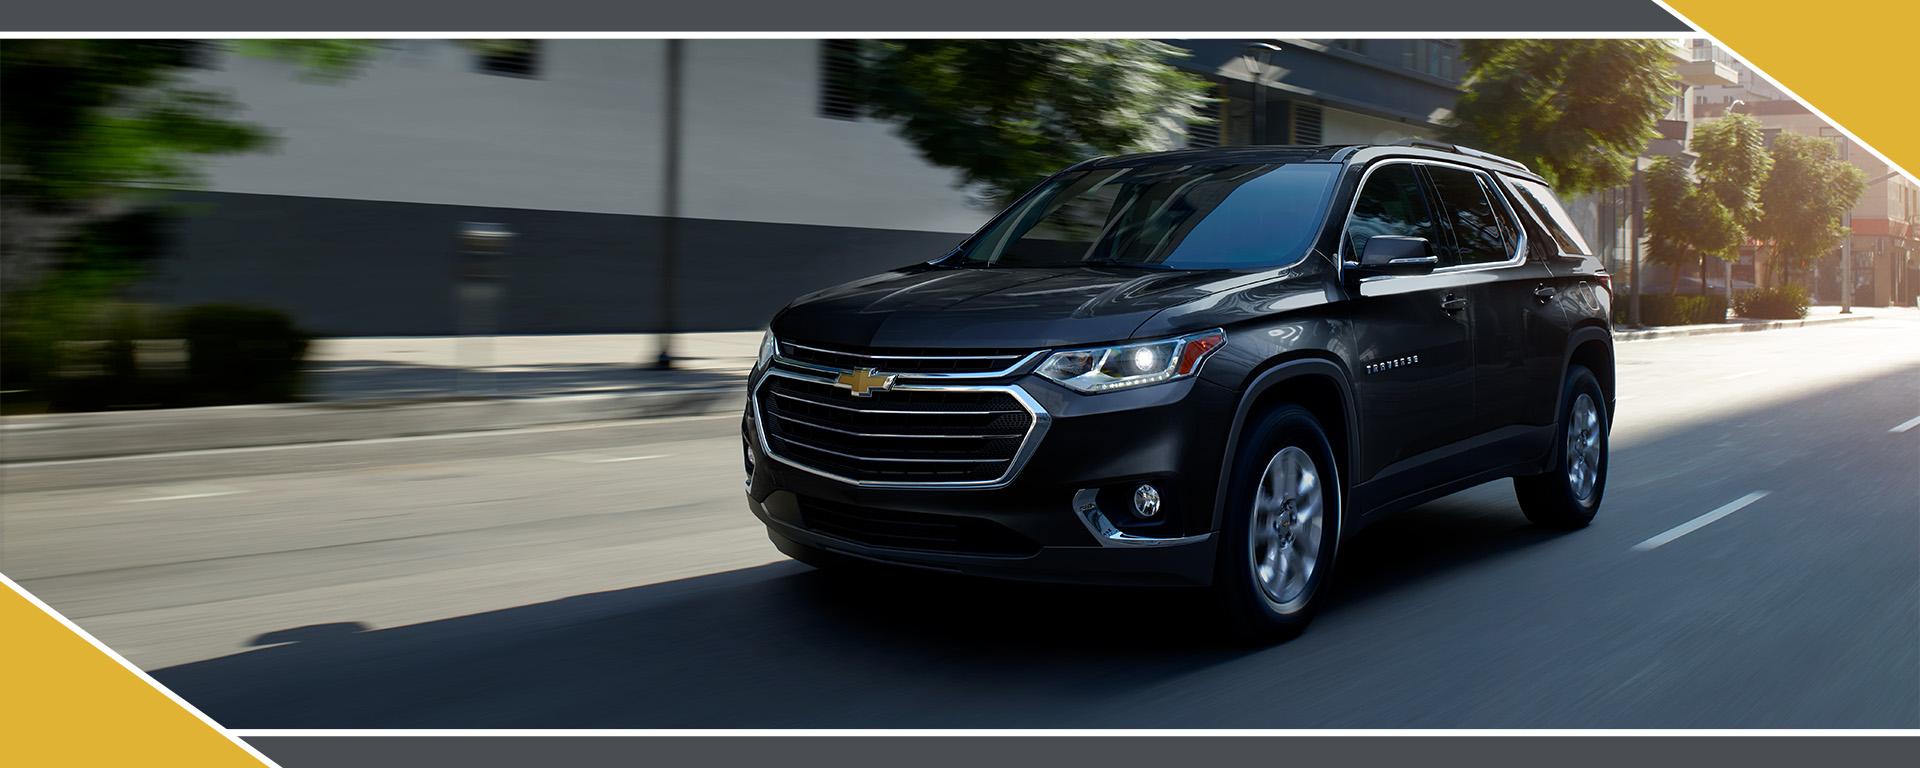 Used Chevy Traverse Milford Ohio